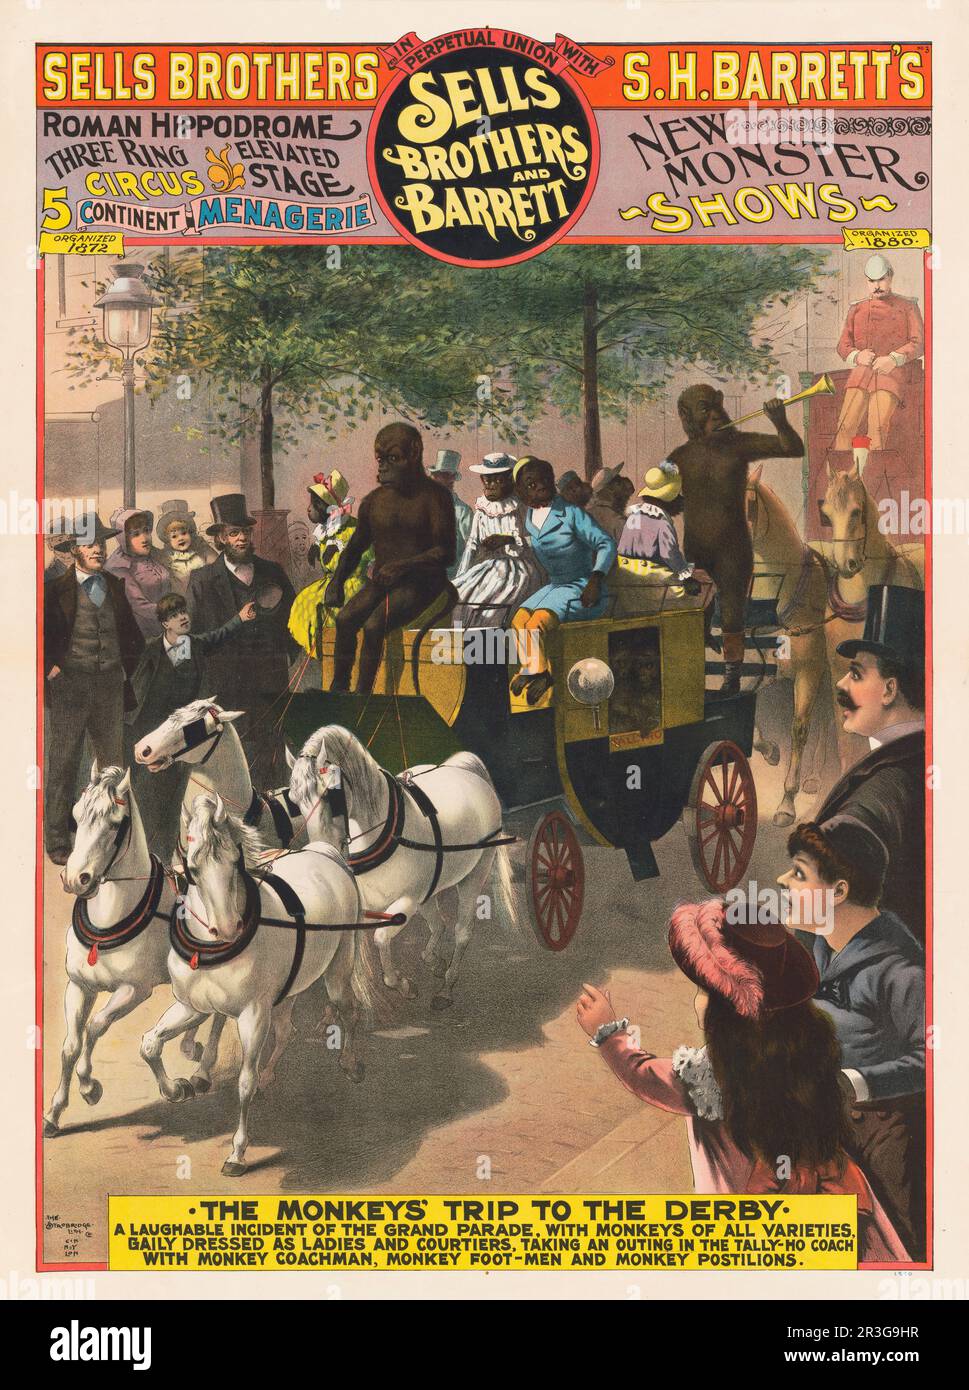 Vintage Sells Brothers and Barrett circus poster showing a monkey driven coach, circa 1890. Stock Photo